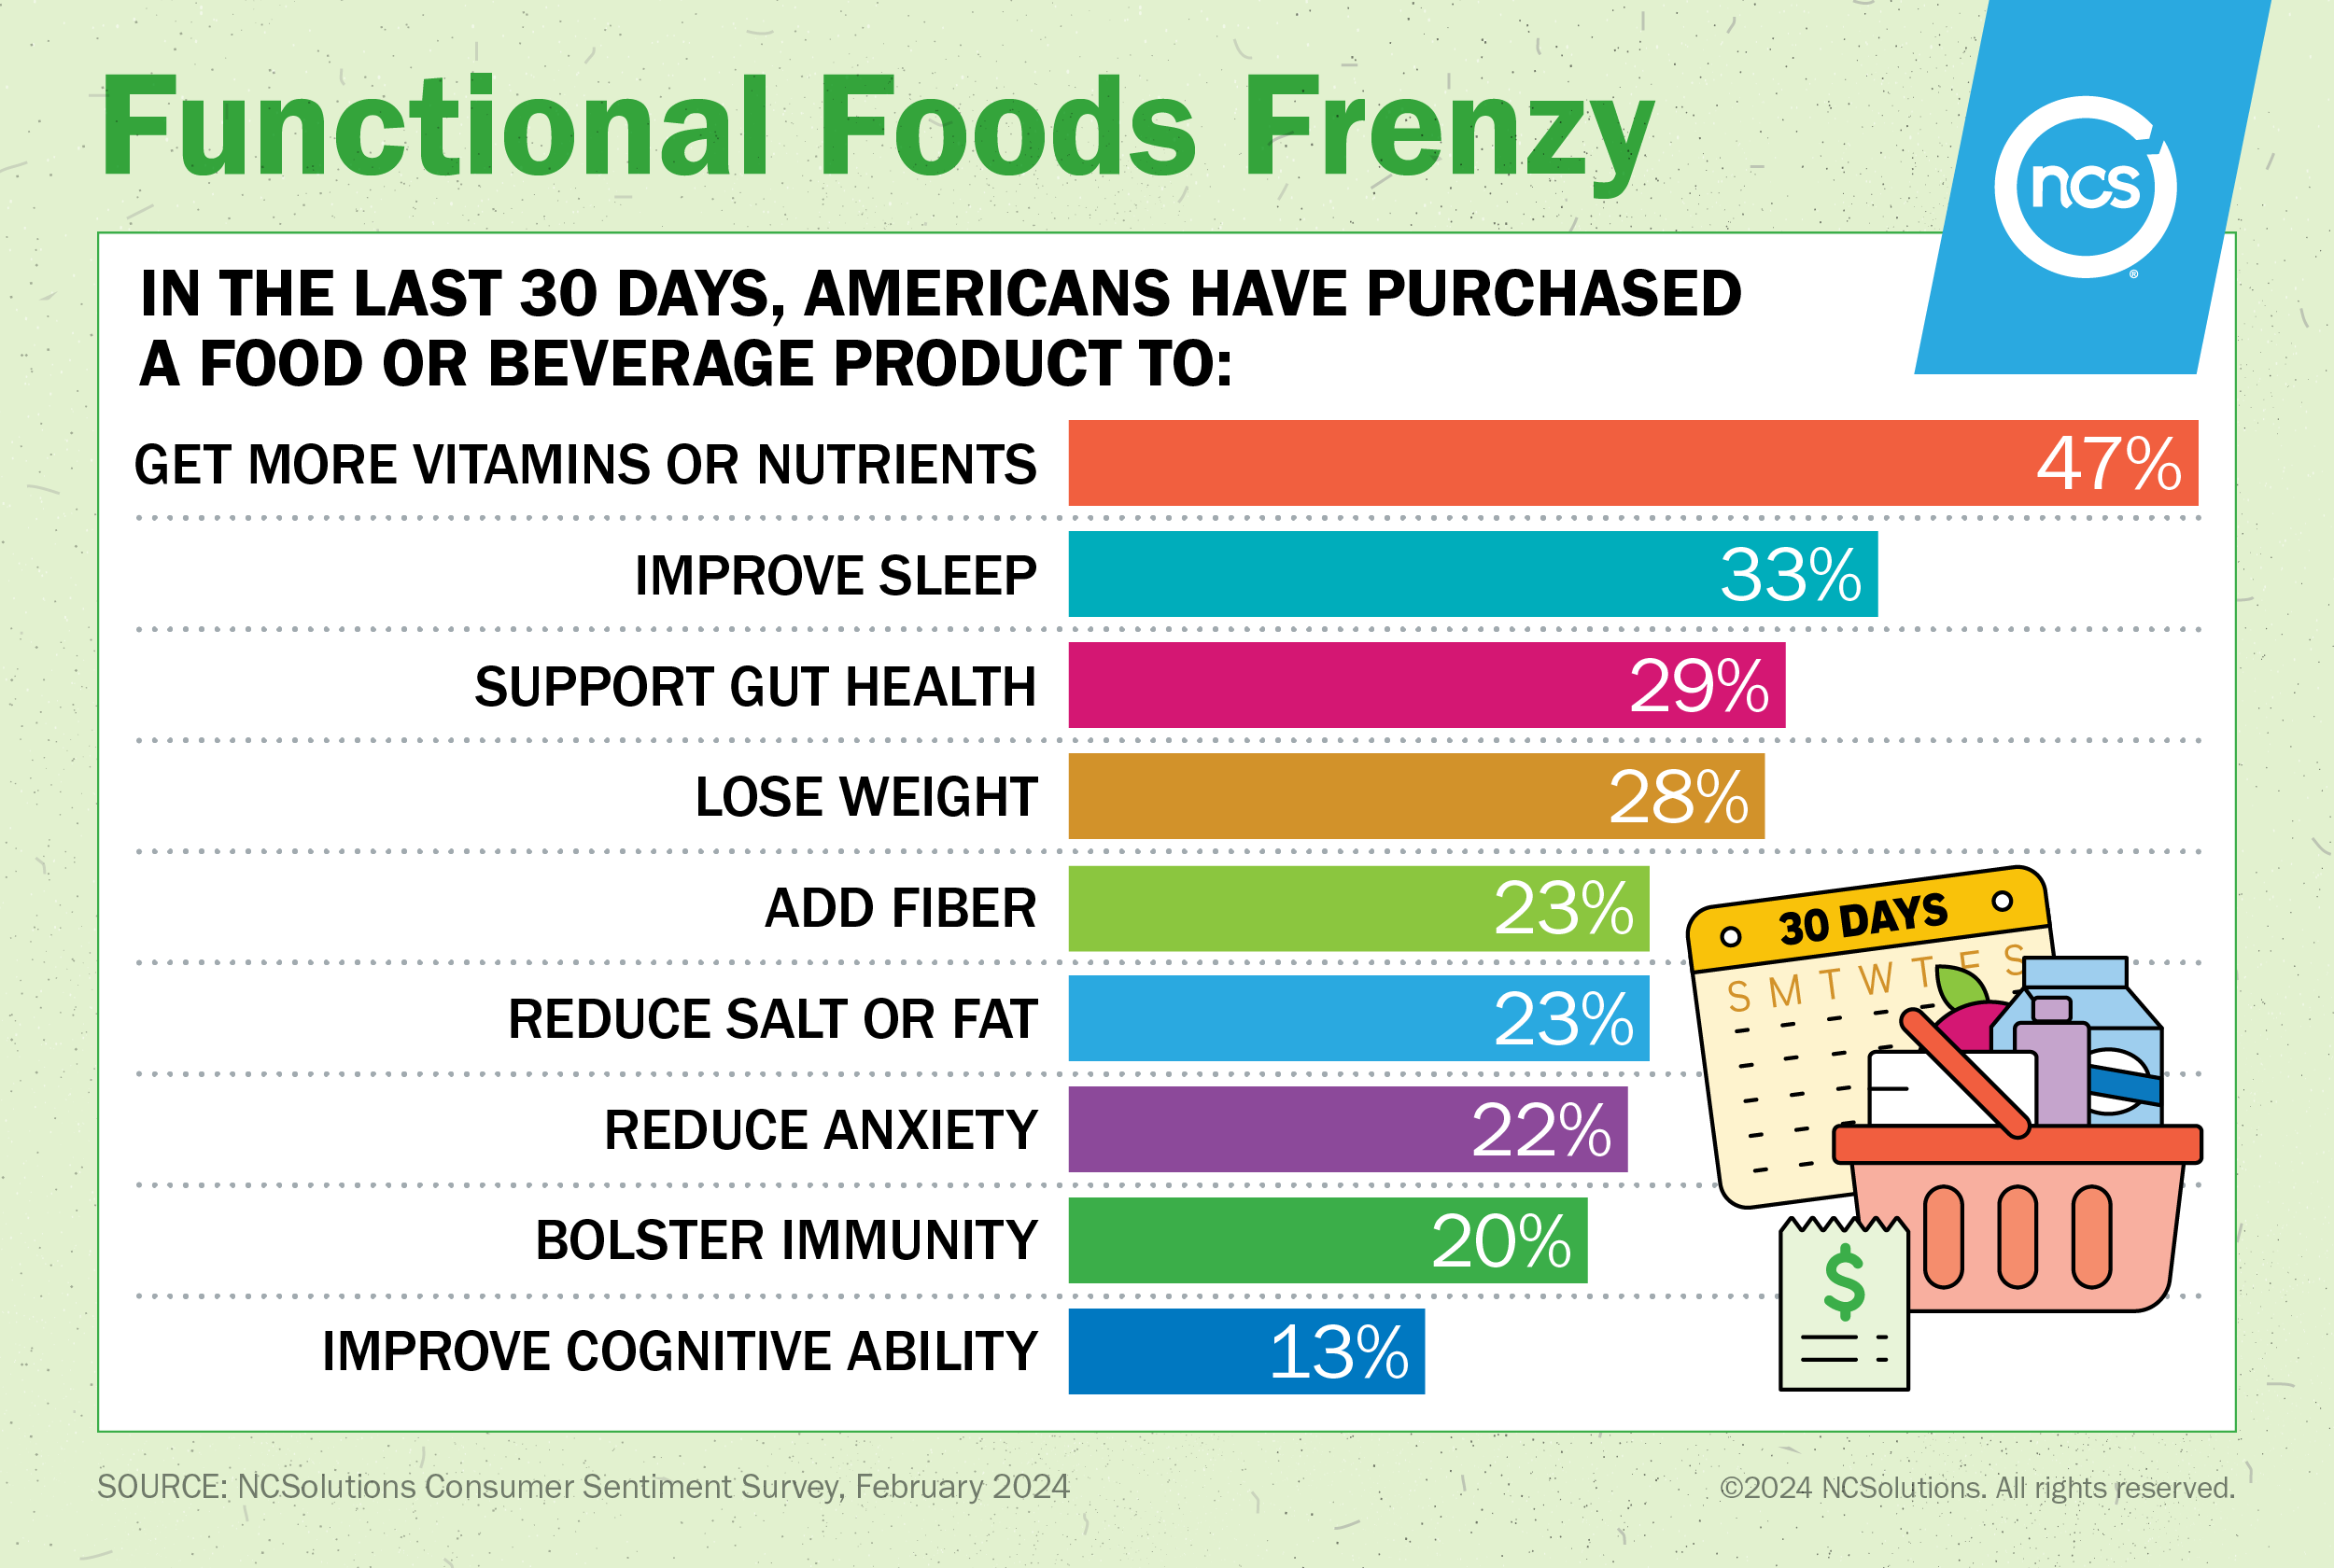 Percentages of Americans in the last 30 days who have purchased a food or beverage product.